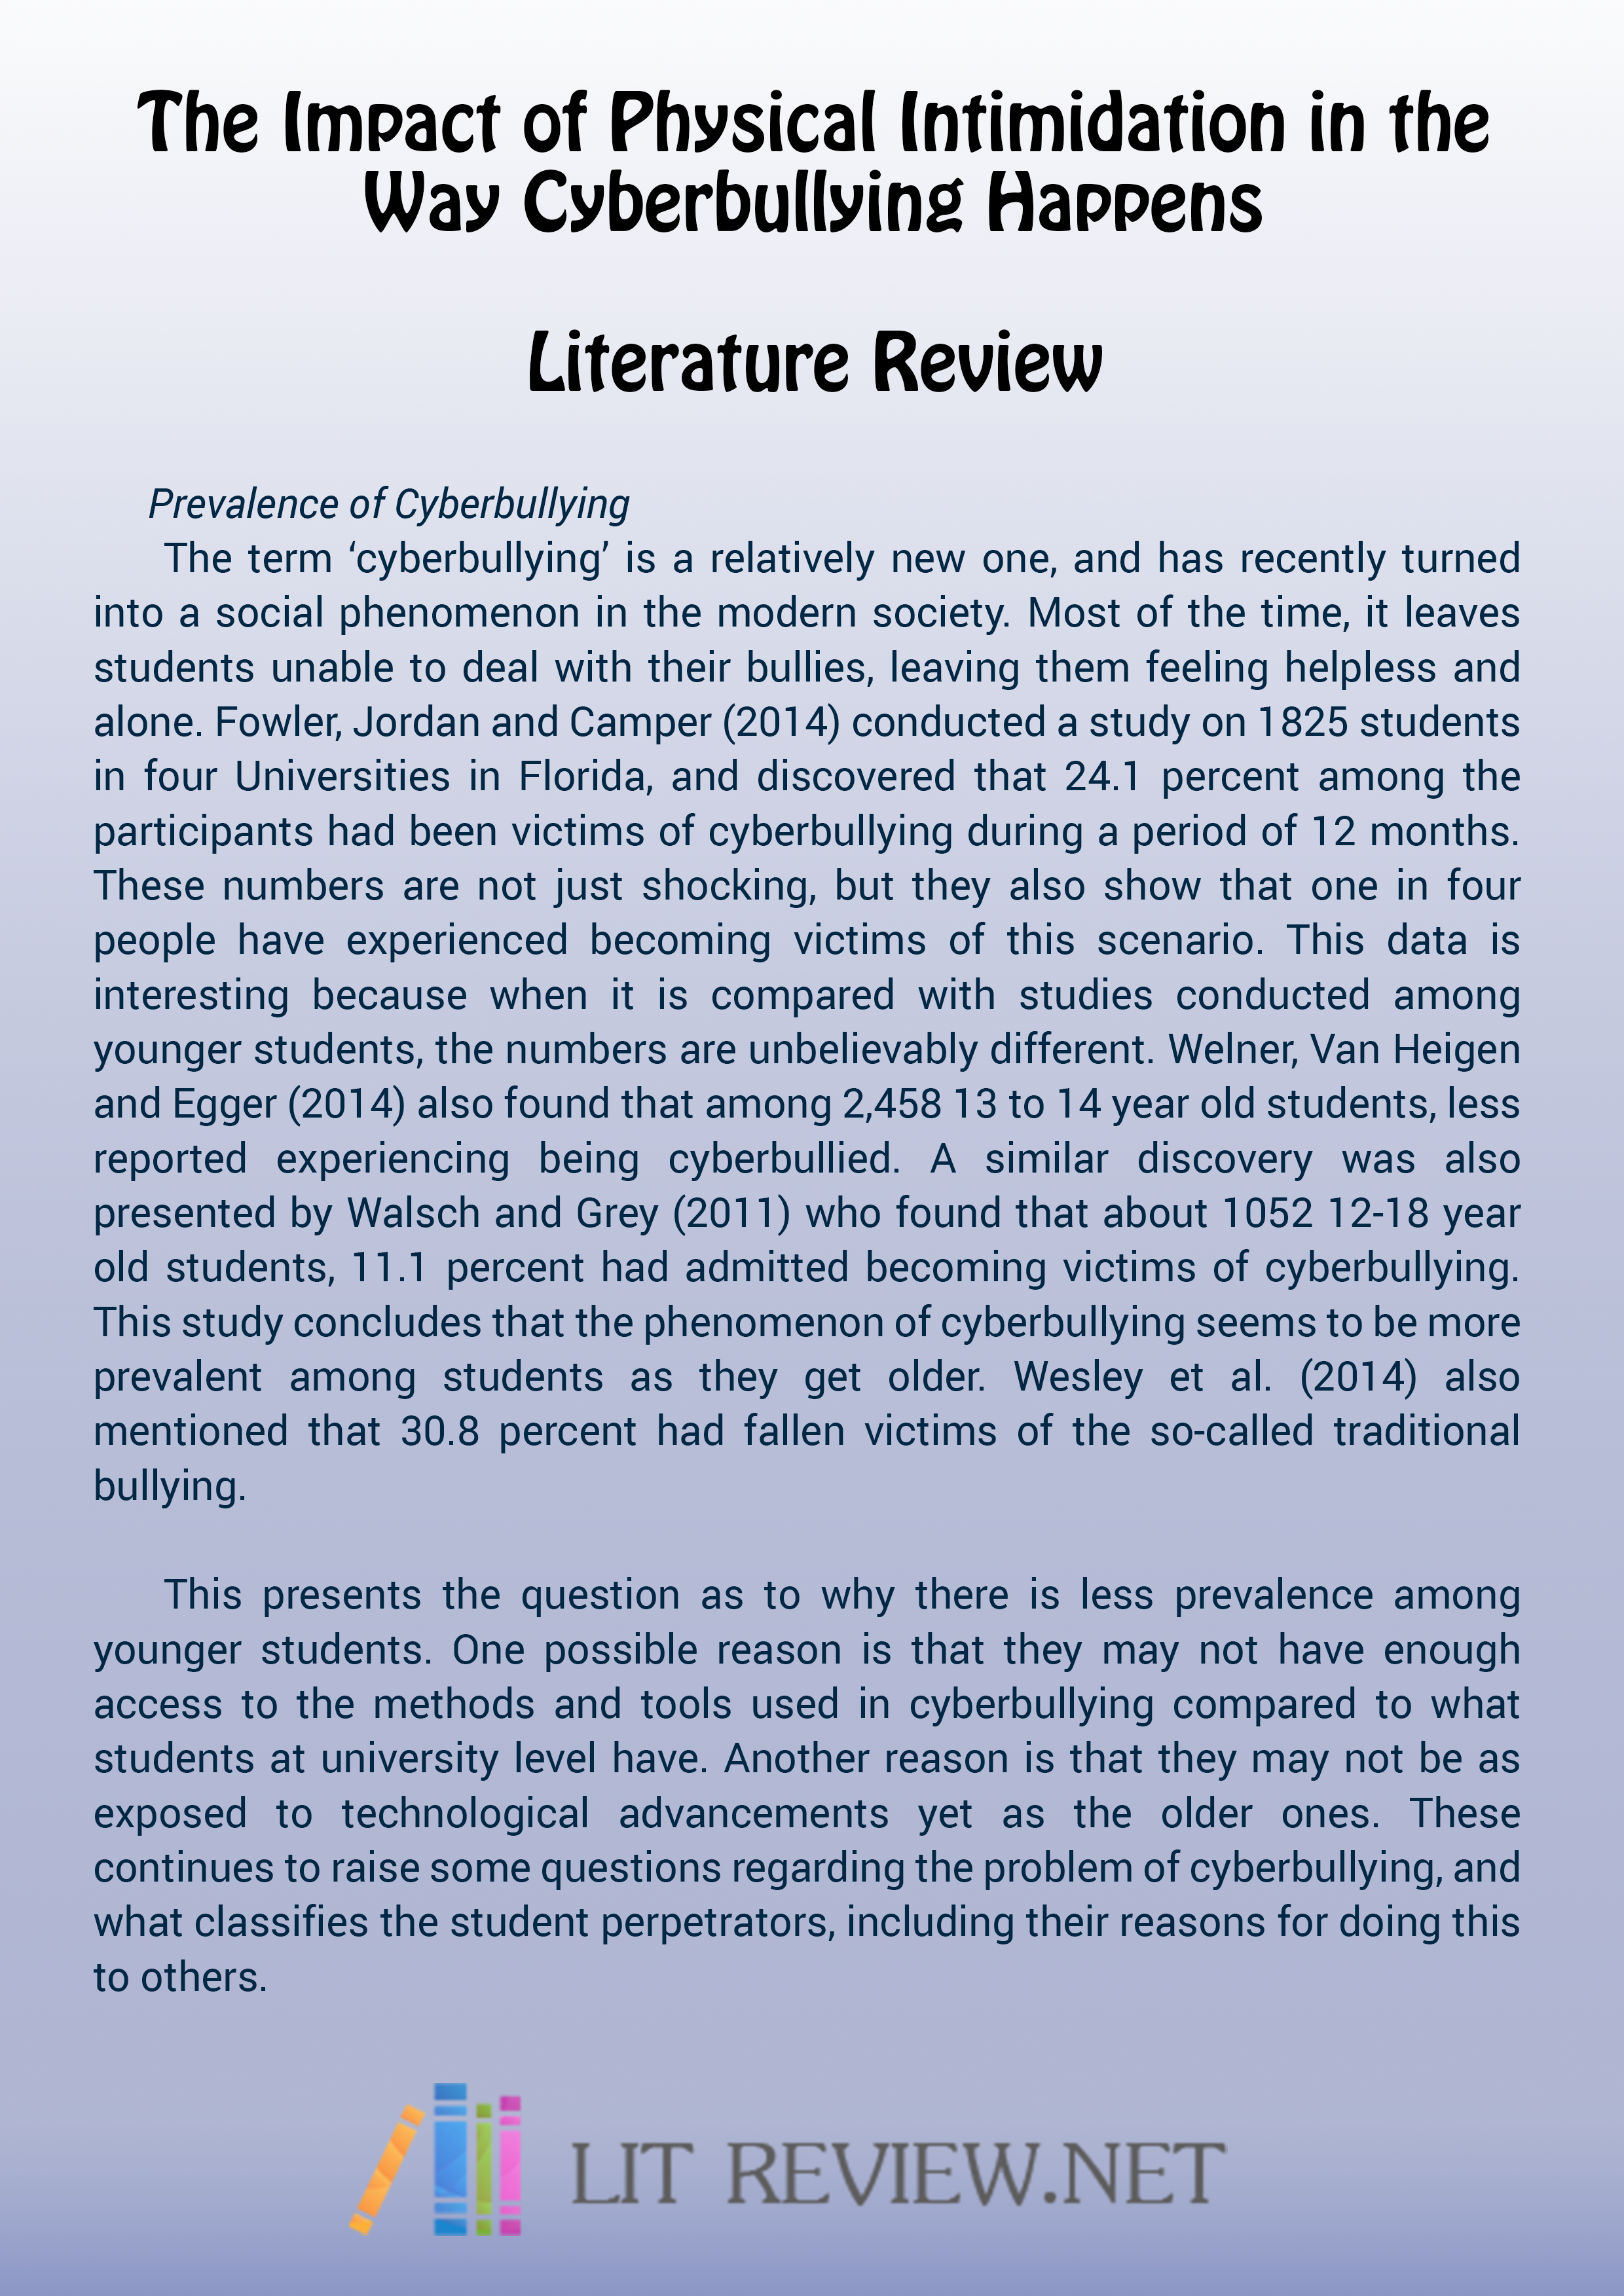 How to start a literature review for a dissertation